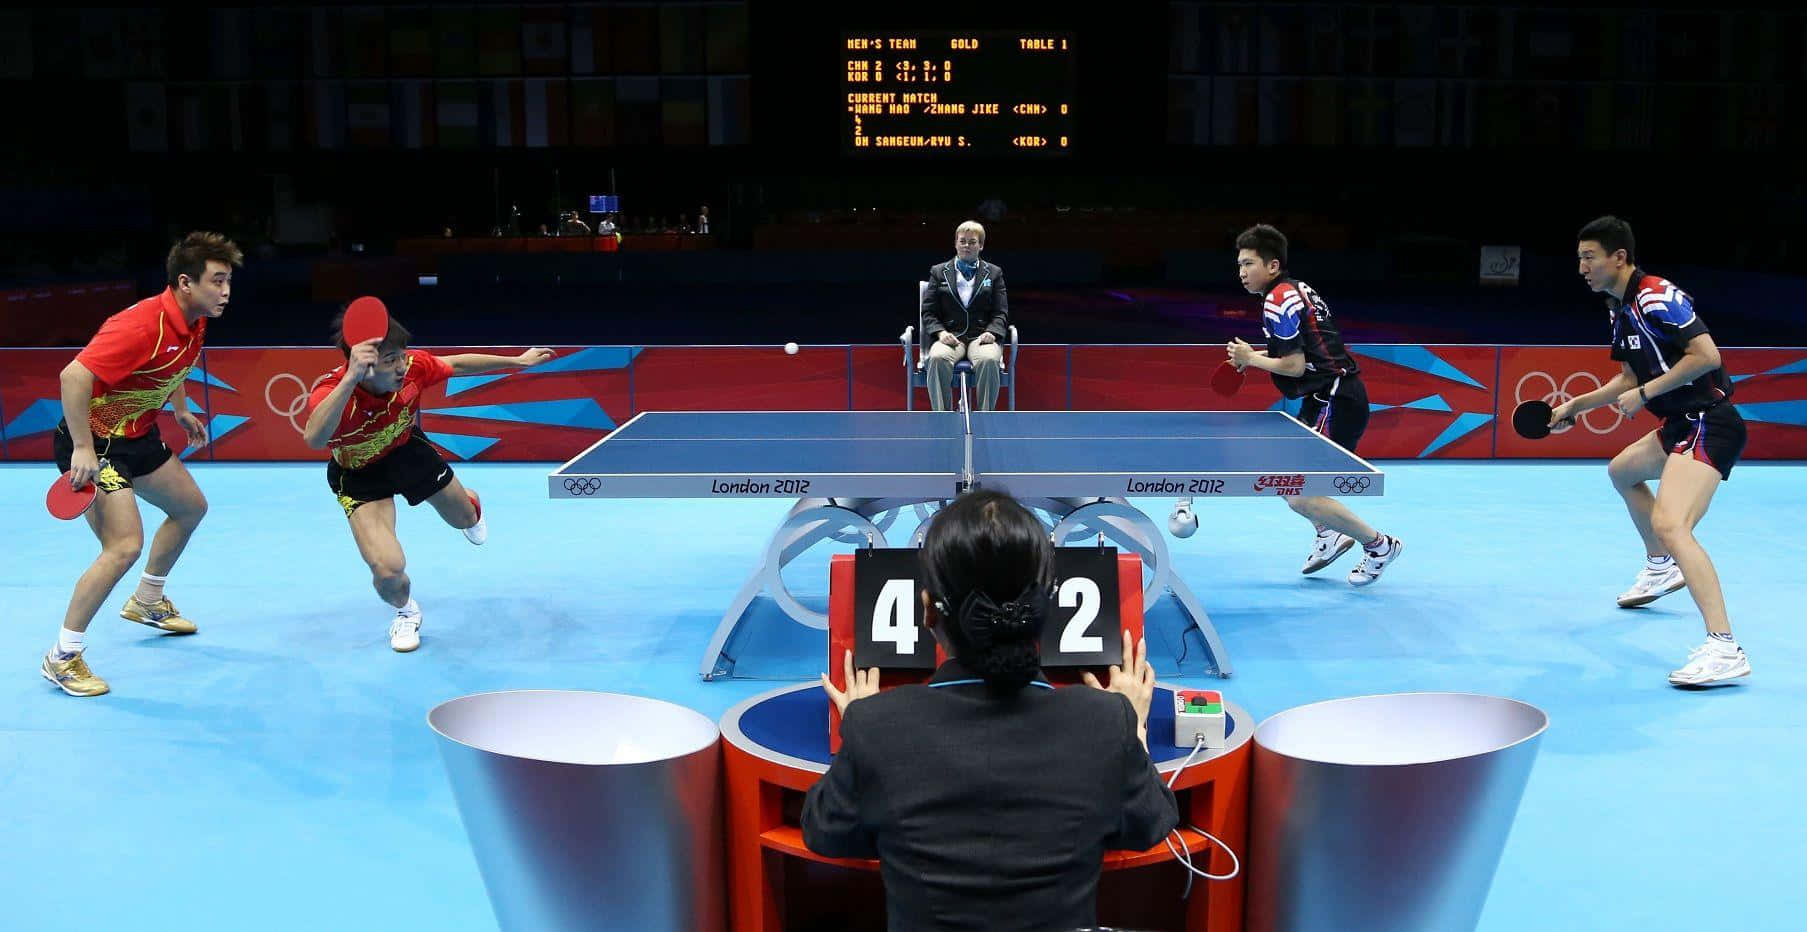 A Group Of People Playing Table Tennis In An Arena